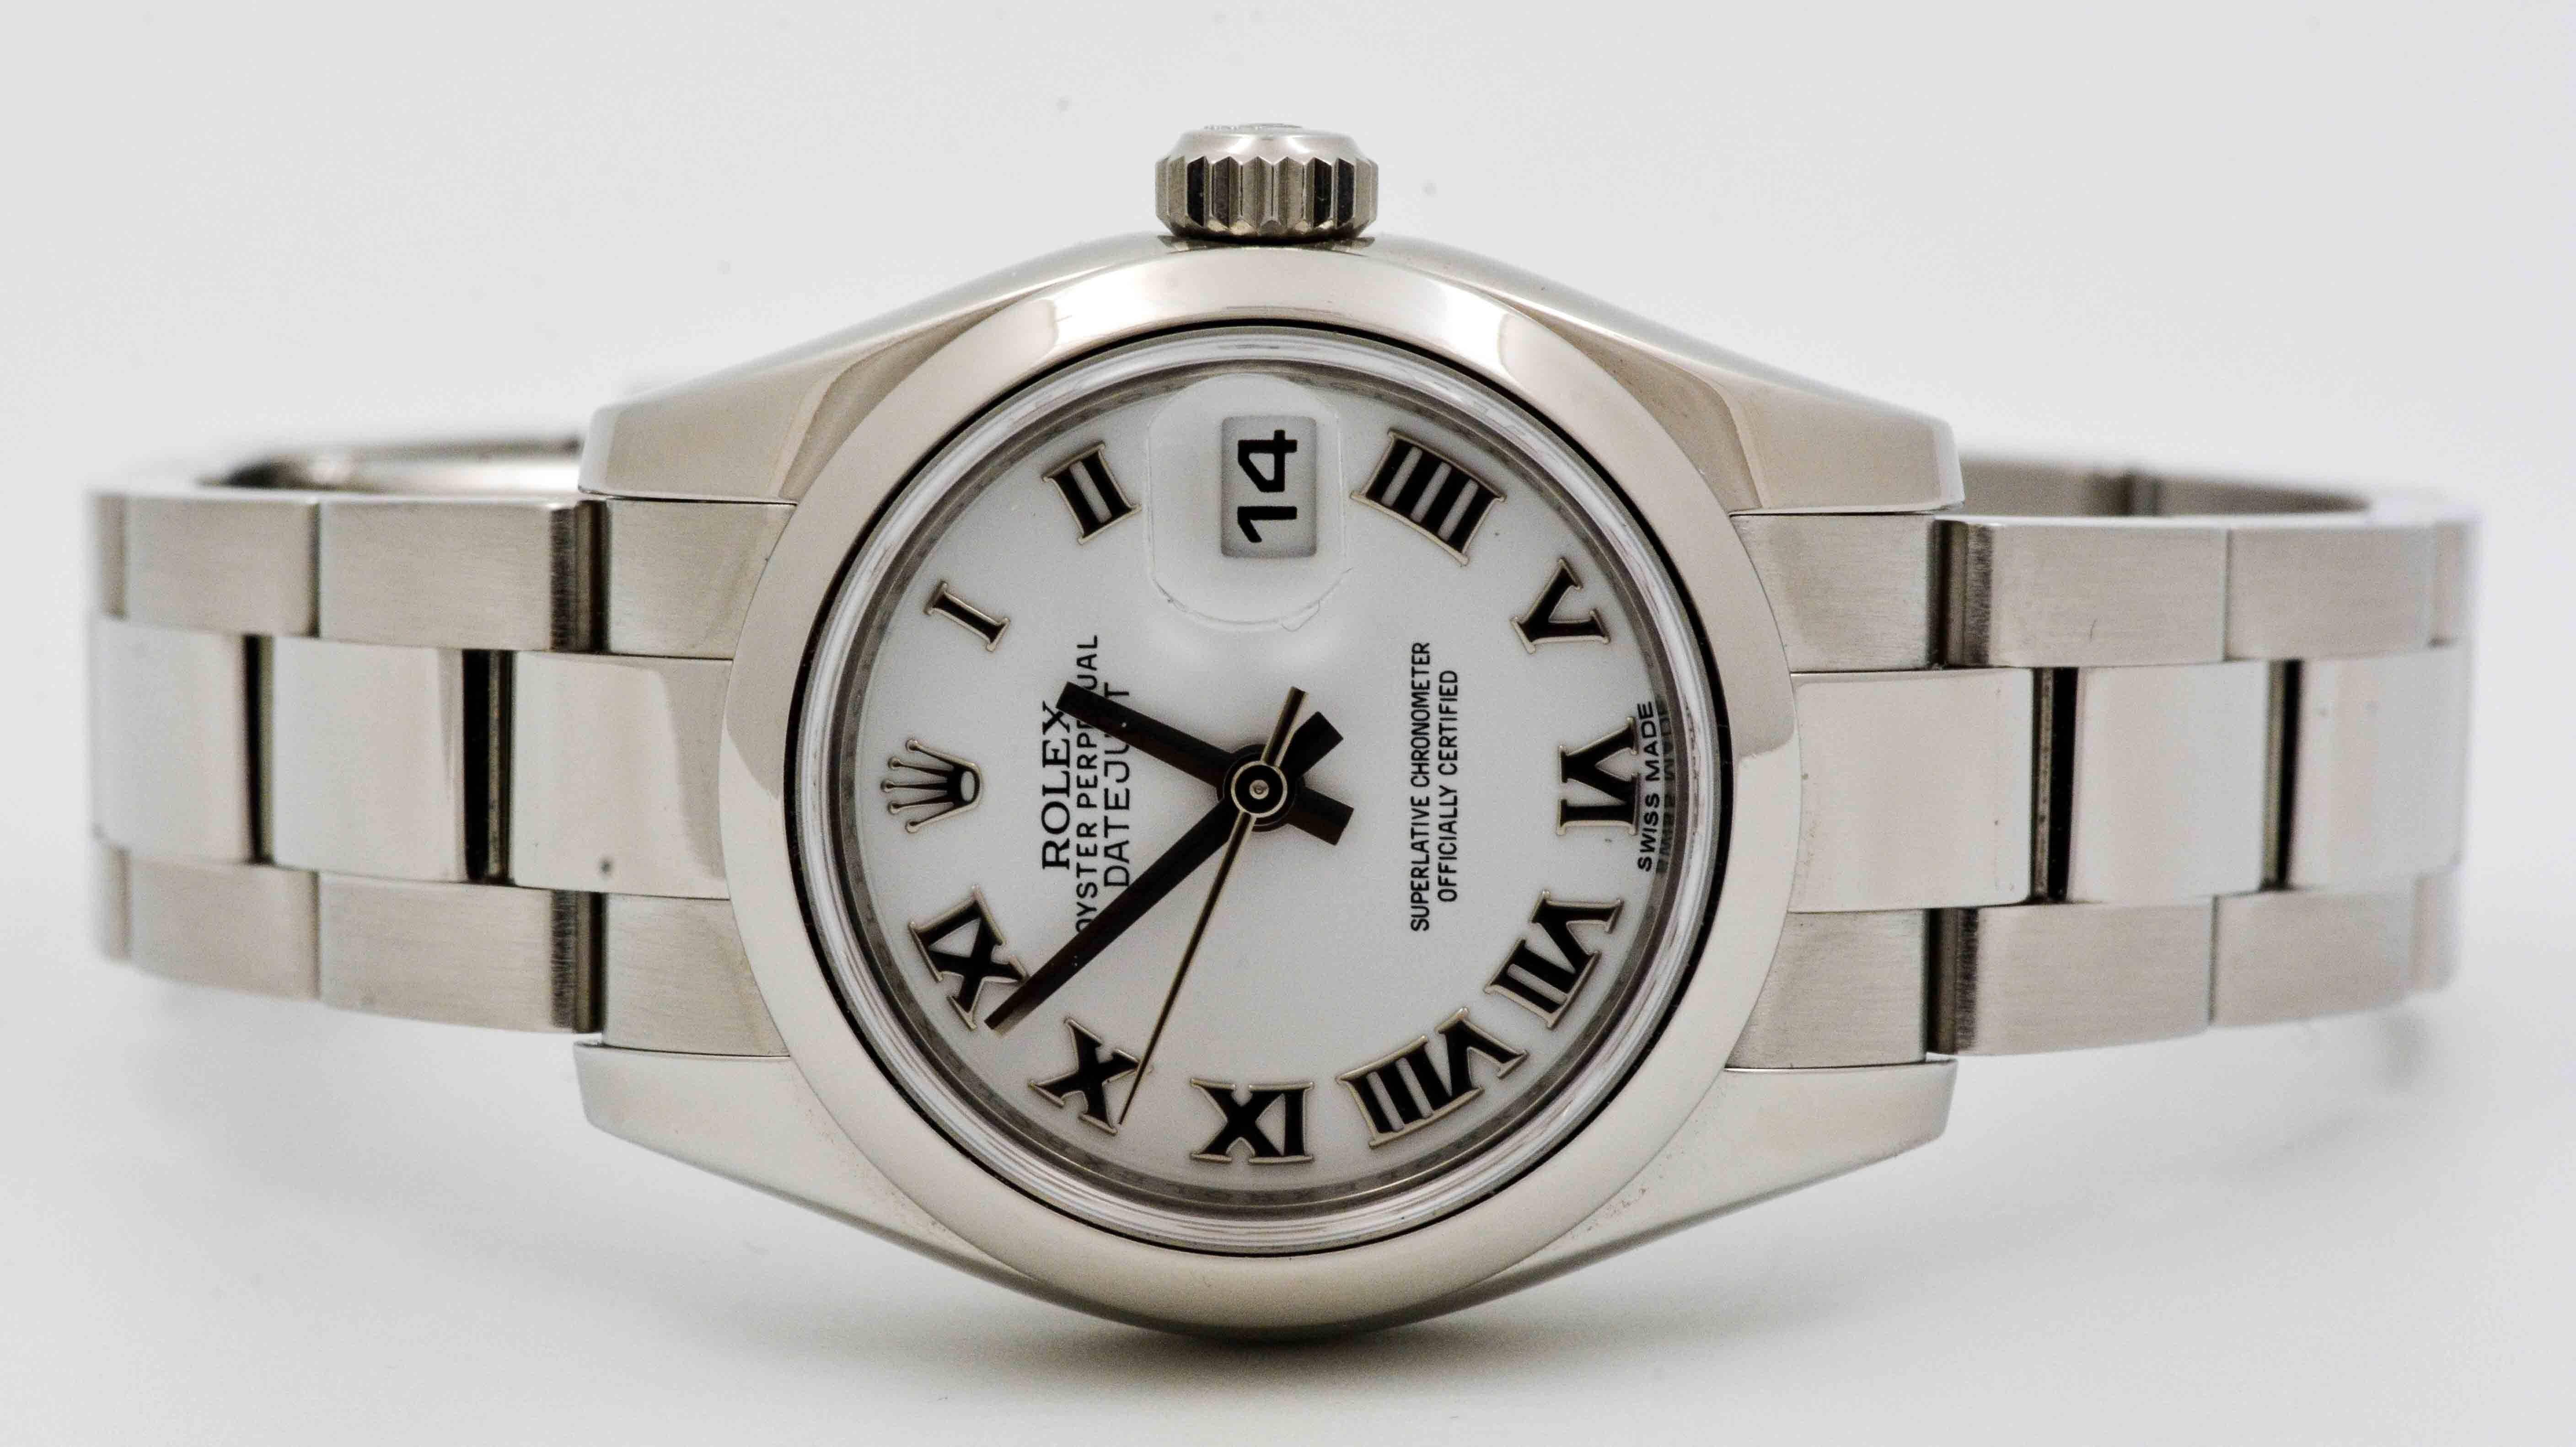 Celebrated by elegance and functionality, this Rolex DateJust Watch is suitable for any occasion. Rolex DateJust watch has an automatic movement, a white Roman numeral dial with a domed bezel and durable sapphire crystal measuring 26 mm and sports a